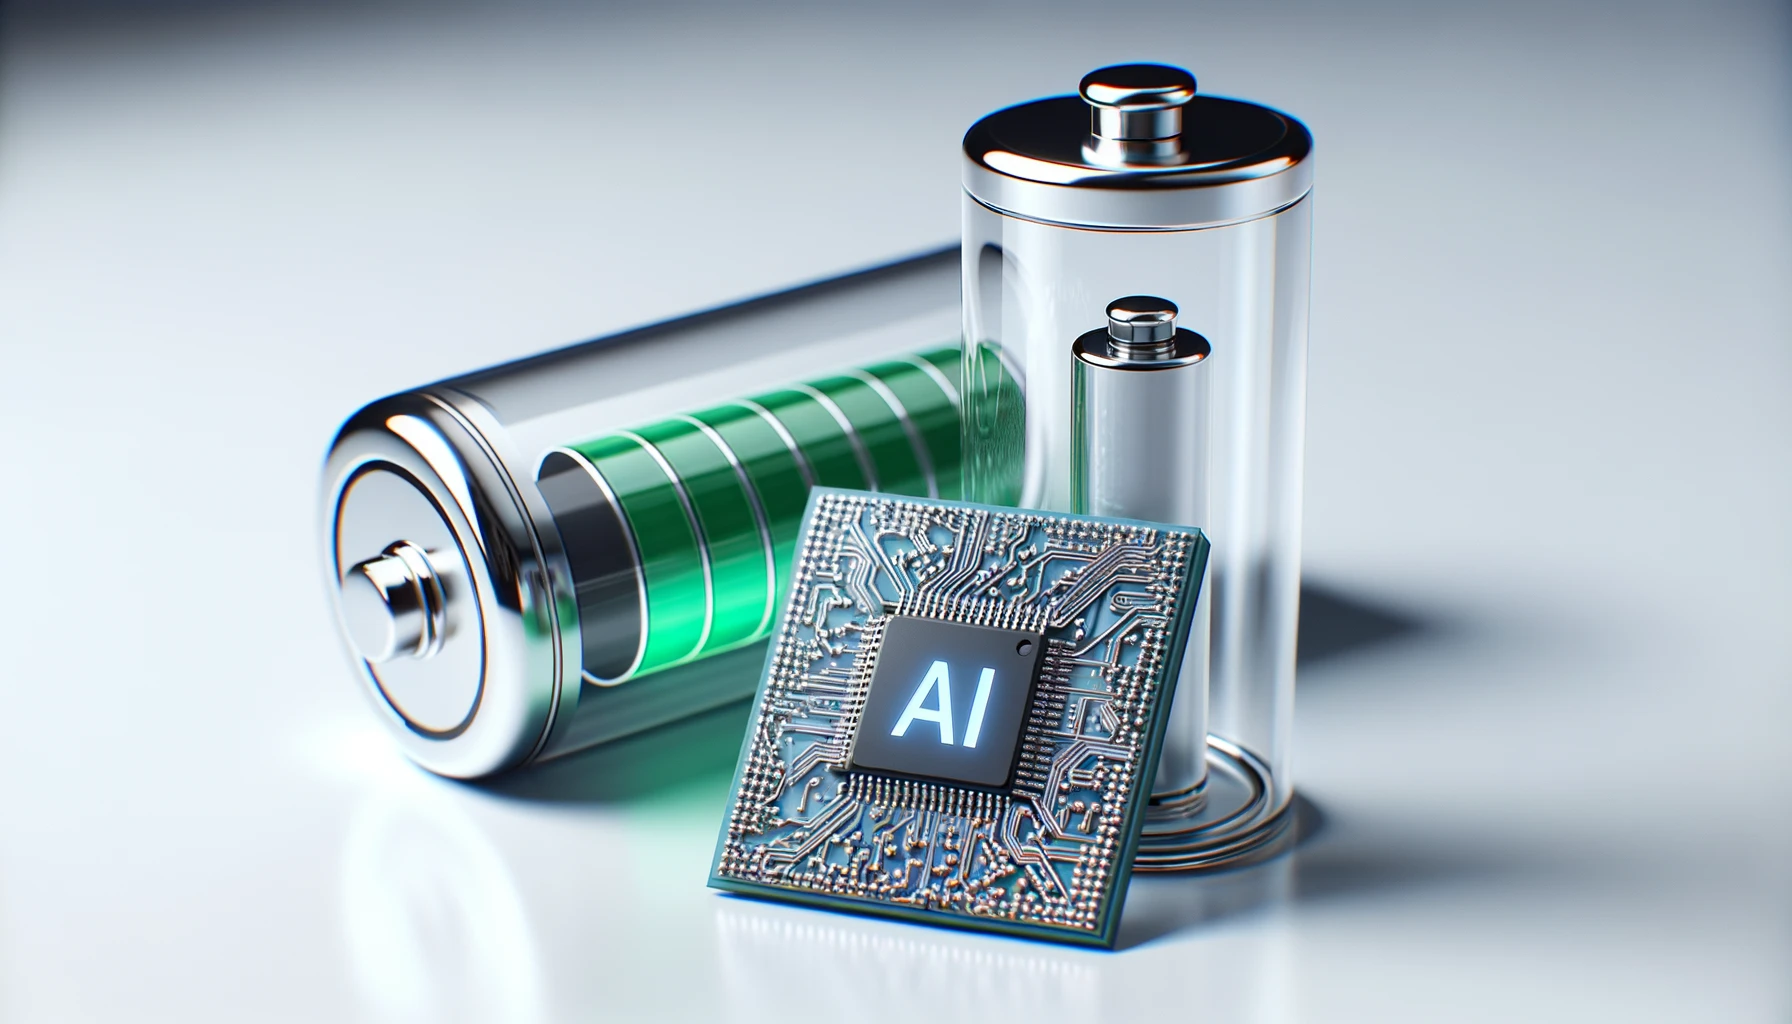 Photo with a sleek and modern design of a transparent computer chip placed on a white table, symbolizing AI.